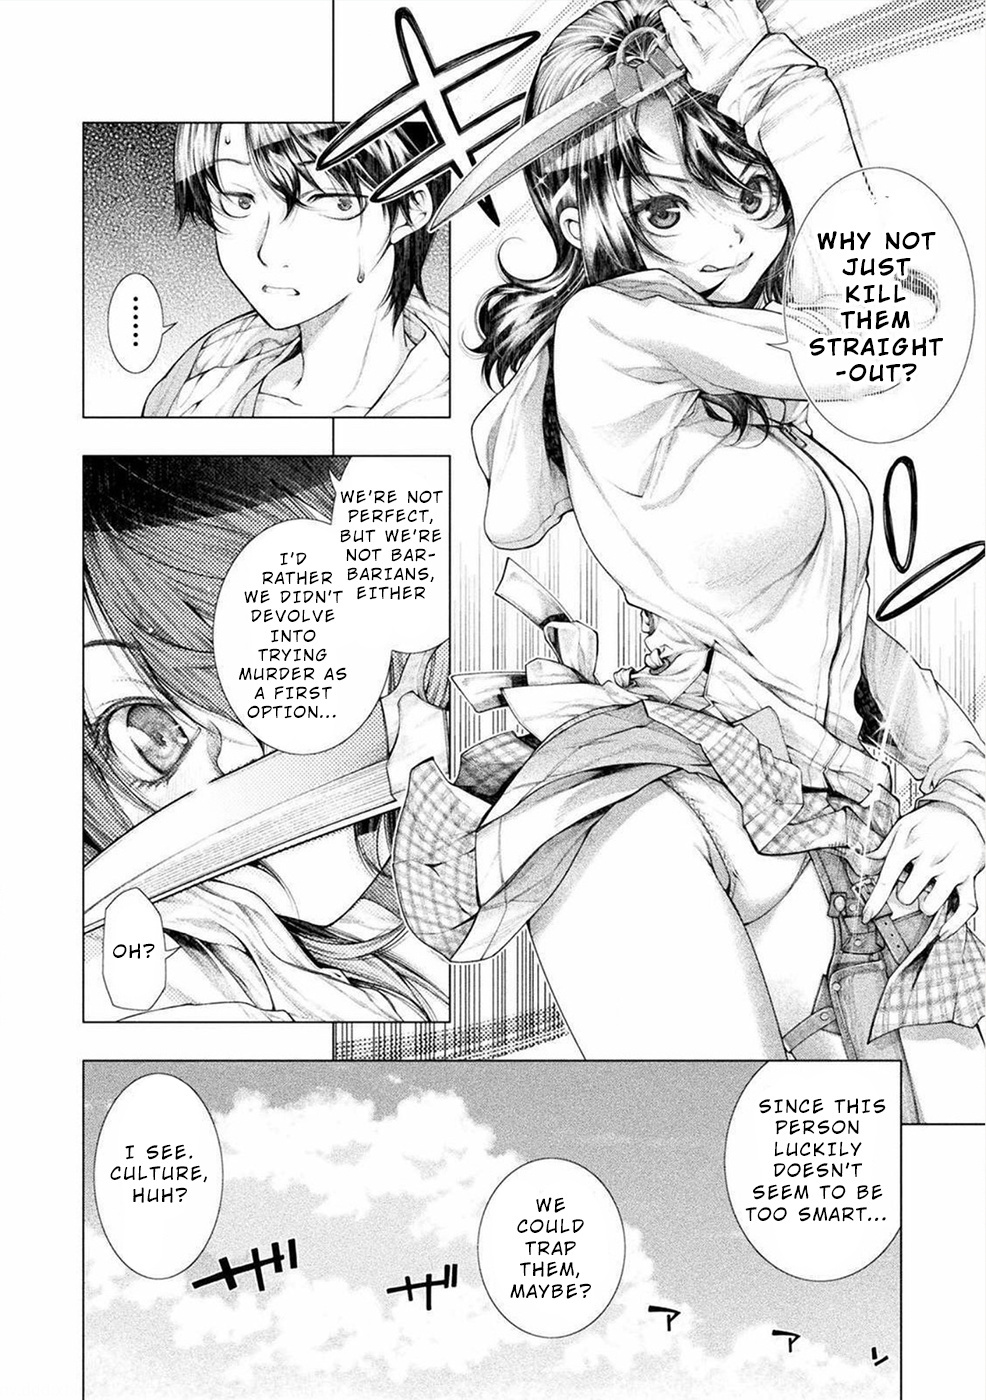 Lovetrap Island - Passion In Distant Lands - Chapter 6 #18